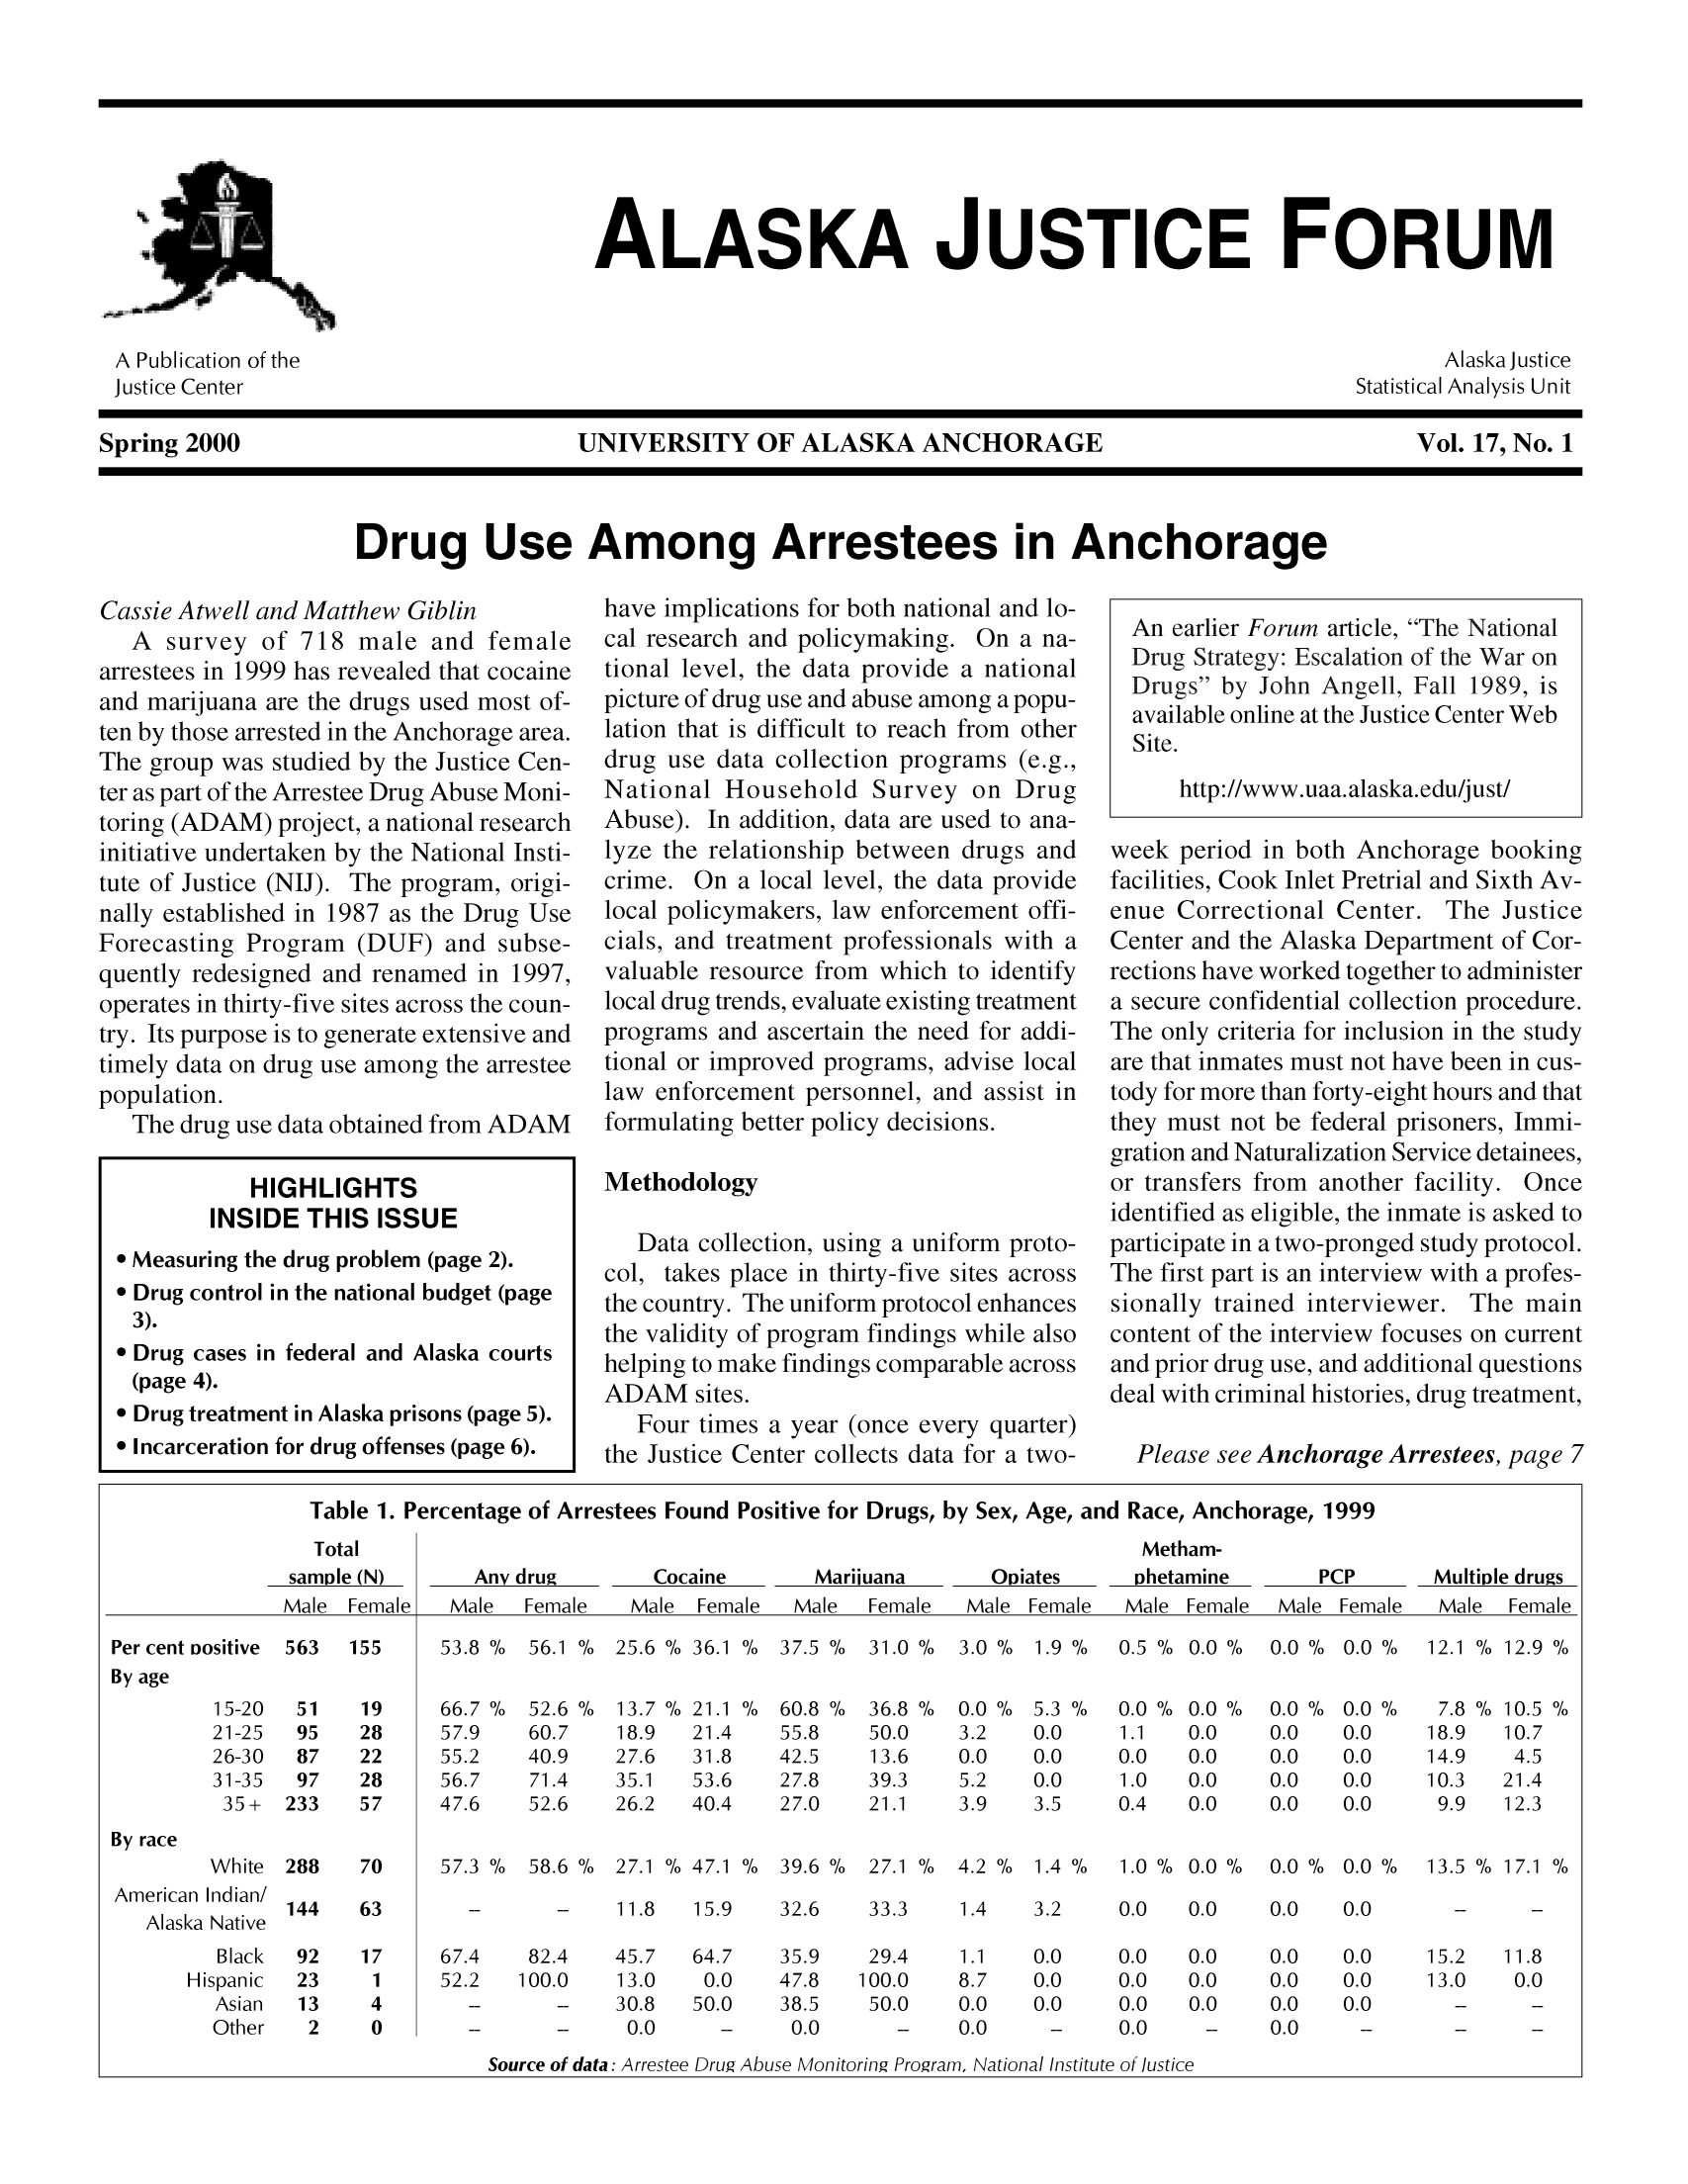 handle is hein.journals/aljufor17 and id is 1 raw text is: ALASKA JUSTICE FORUMA Publication of the                                                                                         Alaska JusticeJustice Center                                                                                        Statistical Analysis UnitSpring 2000                            UNIVERSITY OF ALASKA ANCHORAGE                                       Vol. 17, No. 1Drug Use Among Arrestees in AnchorageCassie Atwell and Matthew Giblin         have implications for both national and lo-A survey of 718 male and female        cal research and policymaking. On a na-    An earlier Forum article, o   Natioalarrestees in 1999 has revealed that cocaine  tional level, the data provide a national  Drug Strategyh Escalatiol, of th War oand marijuana are the drugs used most of-  picture of drug use and abuse among a popu- available online at the Justice Center Webten by those arrested in the Anchorage area.  lation that is difficult to reach from other  Site.The group was studied by the Justice Cen-  drug use data collection programs (e.g.,ter as part of the Arrestee Drug Abuse Moni-  National Household Survey on Drug          http://www.uaa.alaska.edu/just/toring (ADAM) project, a national research  Abuse). In addition, data are used to ana-initiative undertaken by the National Insti-  lyze the relationship between drugs and  week period in both Anchorage bookingtute of Justice (NIJ). The program, origi-  crime. On a local level, the data provide  facilities, Cook Inlet Pretrial and Sixth Av-nally established in 1987 as the Drug Use  local policymakers, law enforcement offi-  enue Correctional Center. The JusticeForecasting Program (DUF) and subse-     cials, and treatment professionals with a  Center and the Alaska Department of Cor-quently redesigned and renamed in 1997,  valuable resource from which to identify  rections have worked together to administeroperates in thirty-five sites across the coun-  local drug trends, evaluate existing treatment  a secure confidential collection procedure.try. Its purpose is to generate extensive and  programs and ascertain the need for addi-  The only criteria for inclusion in the studytimely data on drug use among the arrestee  tional or improved programs, advise local  are that inmates must not have been in cus-population.                              law enforcement personnel, and assist in  tody for more than forty-eight hours and thatThe drug use data obtained from ADAM   formulating better policy decisions.     they must not be federal prisoners, Immi-gration and Naturalization Service detainees,HIGHLIGHTS                   Methodology                               or transfers from another facility. OnceINSIDE THIS ISSUE                                                         identified as eligible, the inmate is asked toData collection, using a uniform proto-  participate in a two-pronged study protocol.* Measuring the drug problem (page 2).  col, takes place in thirty-five sites across  The first part is an interview with a profes-* Drug control in the national budget (page  the country. The uniform protocol enhances  sionally trained interviewer. The main3).                                   the validity of program findings while also  content of the interview focuses on current* Drug cases in federal and Alaska courts  helping to make findings comparable across  and prior drug use, and additional questions(page 4).                              ADAM sites.                              deal with criminal histories, drug treatment,* Drug treatment in Alaska prisons (page 5).  Four times a year (once every quarter)* Incarceration for drug offenses (page 6).  the Justice Center collects data for a two-  Please see Anchorage Arrestees, page 7Table 1. Percentage of Arrestees Found Positive for Drugs, by Sex, Age, and Race, Anchorage, 1999Total                                                               Metham-samDle (N)     Any drug       Cocaine      Mariiuana      Oviates    Dhetamine      PCP       Multivle drugsMale Female   Male  Female  Male Female   Male  Female  Male Female  Male Female  Male Female  Male FemalePer cent Dositive  563  155  53.8 0/  56.1%0  25.6  0/ 36.1%0  37.5 0/  31.0 0/  3.0 0/  1.9 0/  0.5 0/  0.0 0/  0.0 0/  0.0 0/  12.1%0  12.9 0/By age15-20  51   19     66.70/  52.6  0/  13.70/  21.1  0/  60.8  0/  36.8  0/  0.0  0/  5.3 0/  0.0  0/  0.00/  0.0  0/  0.0  0/  7.8  0/  10.5  0/21-25  95   28     57.9   60.7   18.9  21.4   55.8    50.0   3.2   0.0    1.1   0.0    0.0   0.0   18.9   10.726-30  87   22     55.2   40.9   27.6  31.8   42.5    13.6   0.0   0.0    0.0   0.0    0.0   0.0   14.9    4.531-35  97   28     56.7   71.4   35.1  53.6   27.8    39.3   5.2   0.0    1.0   0.0    0.0   0.0   10.3   21.435±  233   57     47.6   52.6   26.2  40.4    27.0   21.1   3.9   3.5    0.4   0.0    0.0   0.0     9.9  12.3By raceWhite  288  70     57.3 0/  58.6 0/  27.1%0  47.1%0  39.6  0/  27.1%0  4.2 0/  1.4 0/  1.0 0/  0.0 0/  0.0 0/  0.0 0/  13.5 0/  17.1%0American Indian!AakNaie144     63       ..     .    11 .8  15.9  32.6   33.3    1 .4  3.2    0.0   0.0   0.0   0.0Black   92    17     67.4     82.4    45.7   64.7    35.9     29.4    1.1    0.0     0.0    0.0     0.0    0.0     15.2   11.8Hispanic  23      1     52.2   100.0     13.0    0.0    47.8    100.0    8.7    0.0     0.0    0.0     0.0    0.0     13.0    0.0Asian   13     4        ..       ..   30.8   50.0     38.5    50.0    0.0     0.0     0.0   0.0     0.0    0.0       ..      ..Other    2     0                       0.0      --     0.0      --     0.0     --     0.0     --    0.0      ..       .Source of data: Arrestee Drug Abuse Monitoring Program, National Institute of lustice